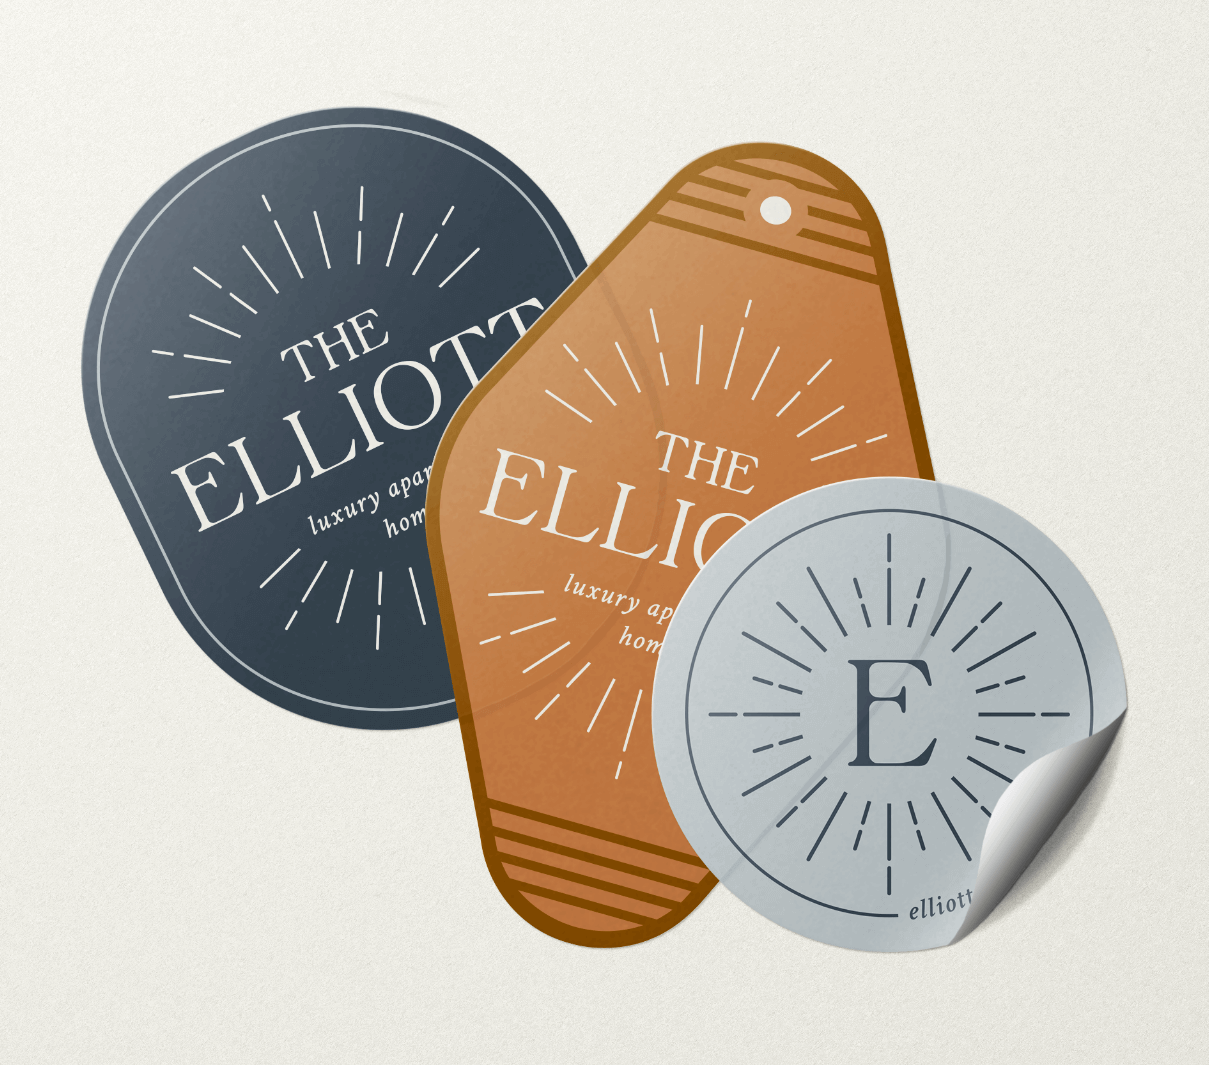 Mockup of sticker designs for The Elliott Apartments in Florida completed by ST8MNT